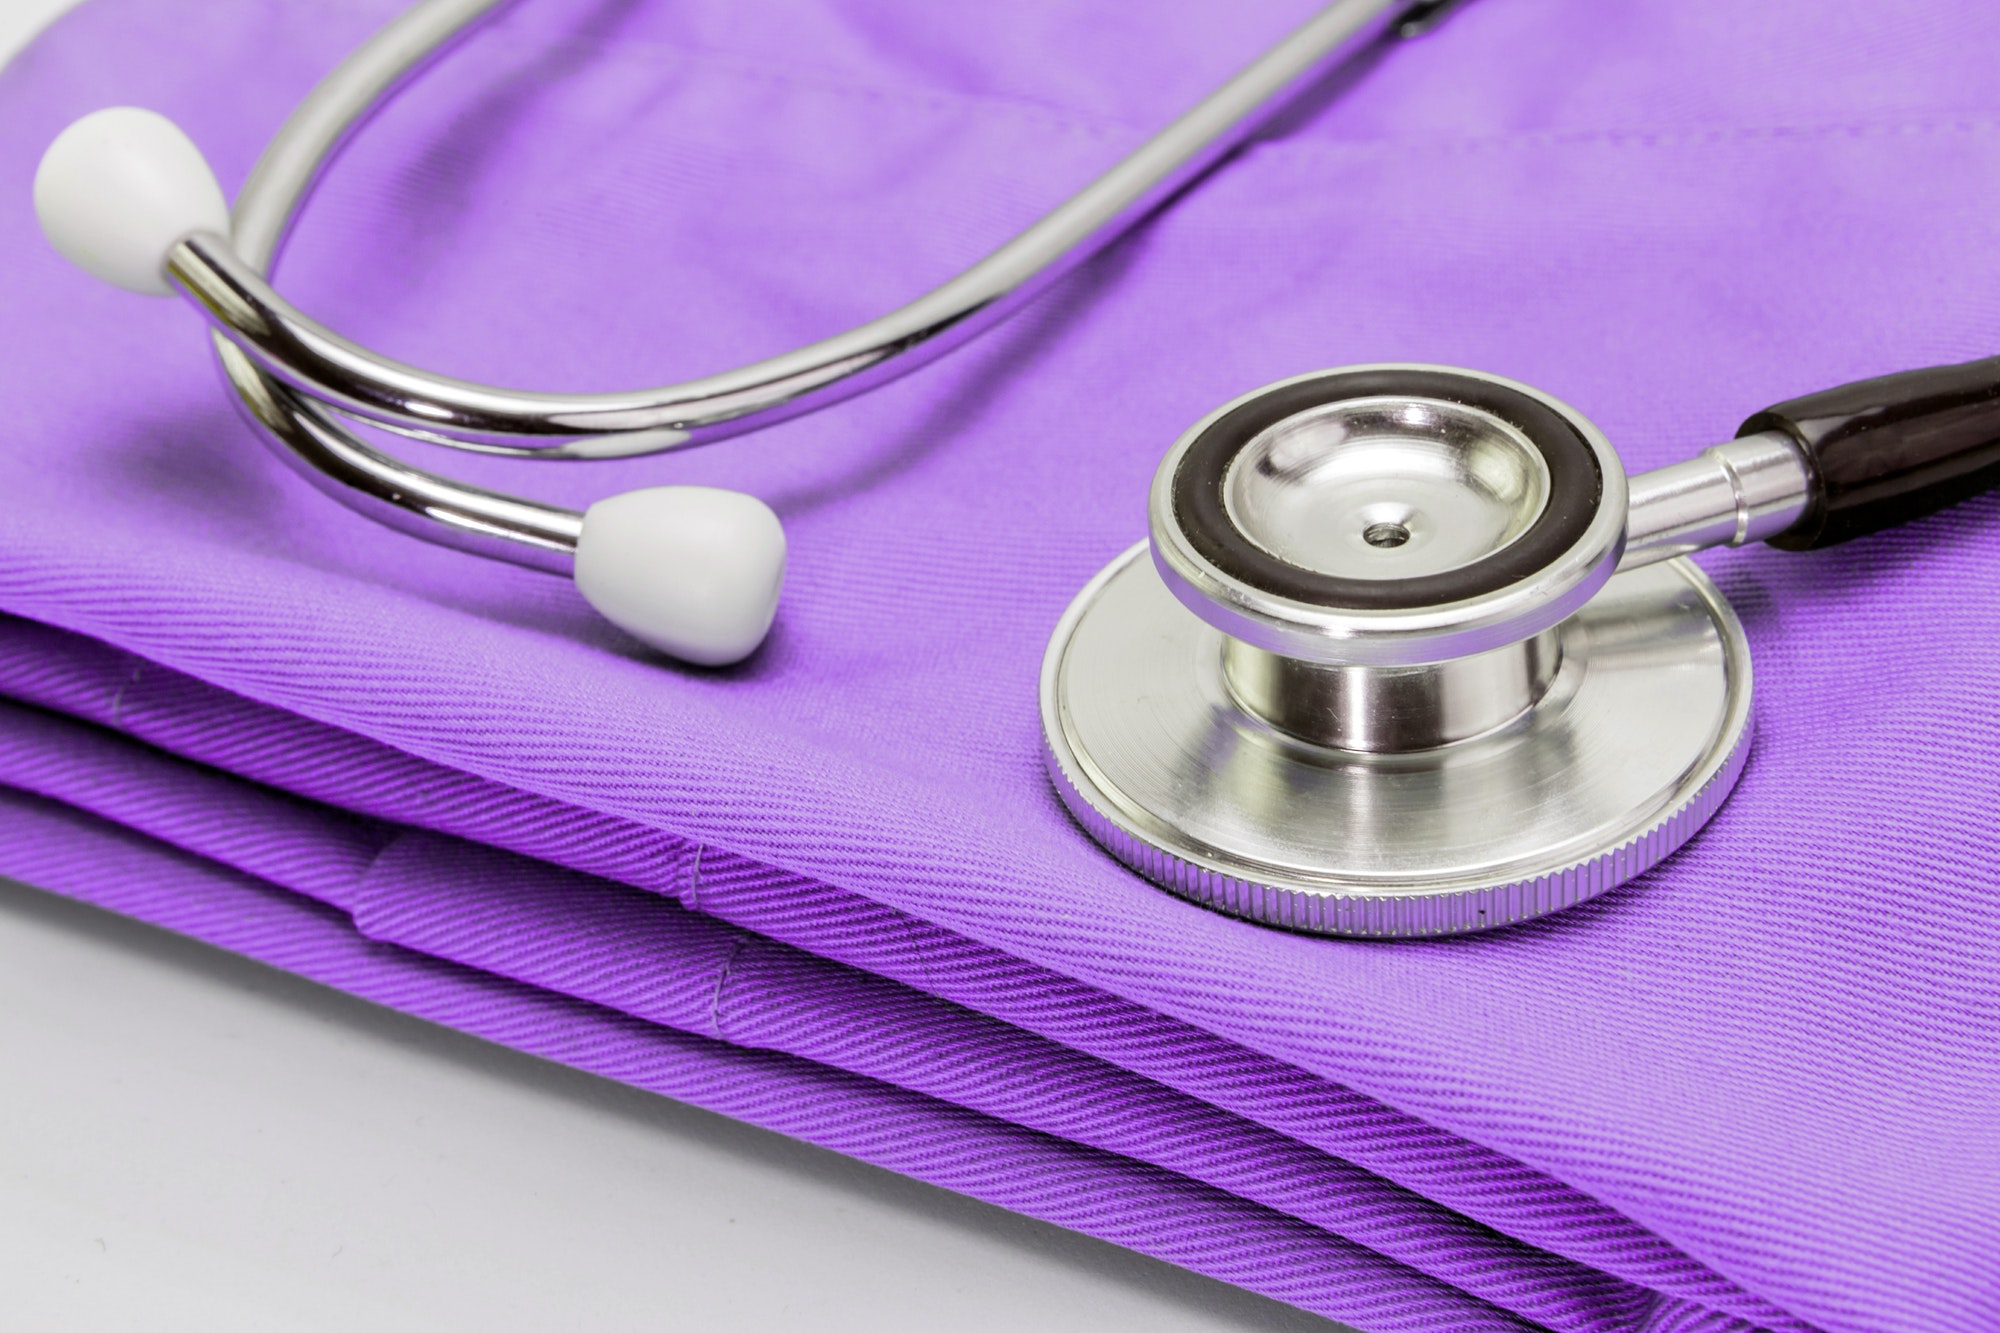 Stethoscope on clothes of nurse, conceptual image